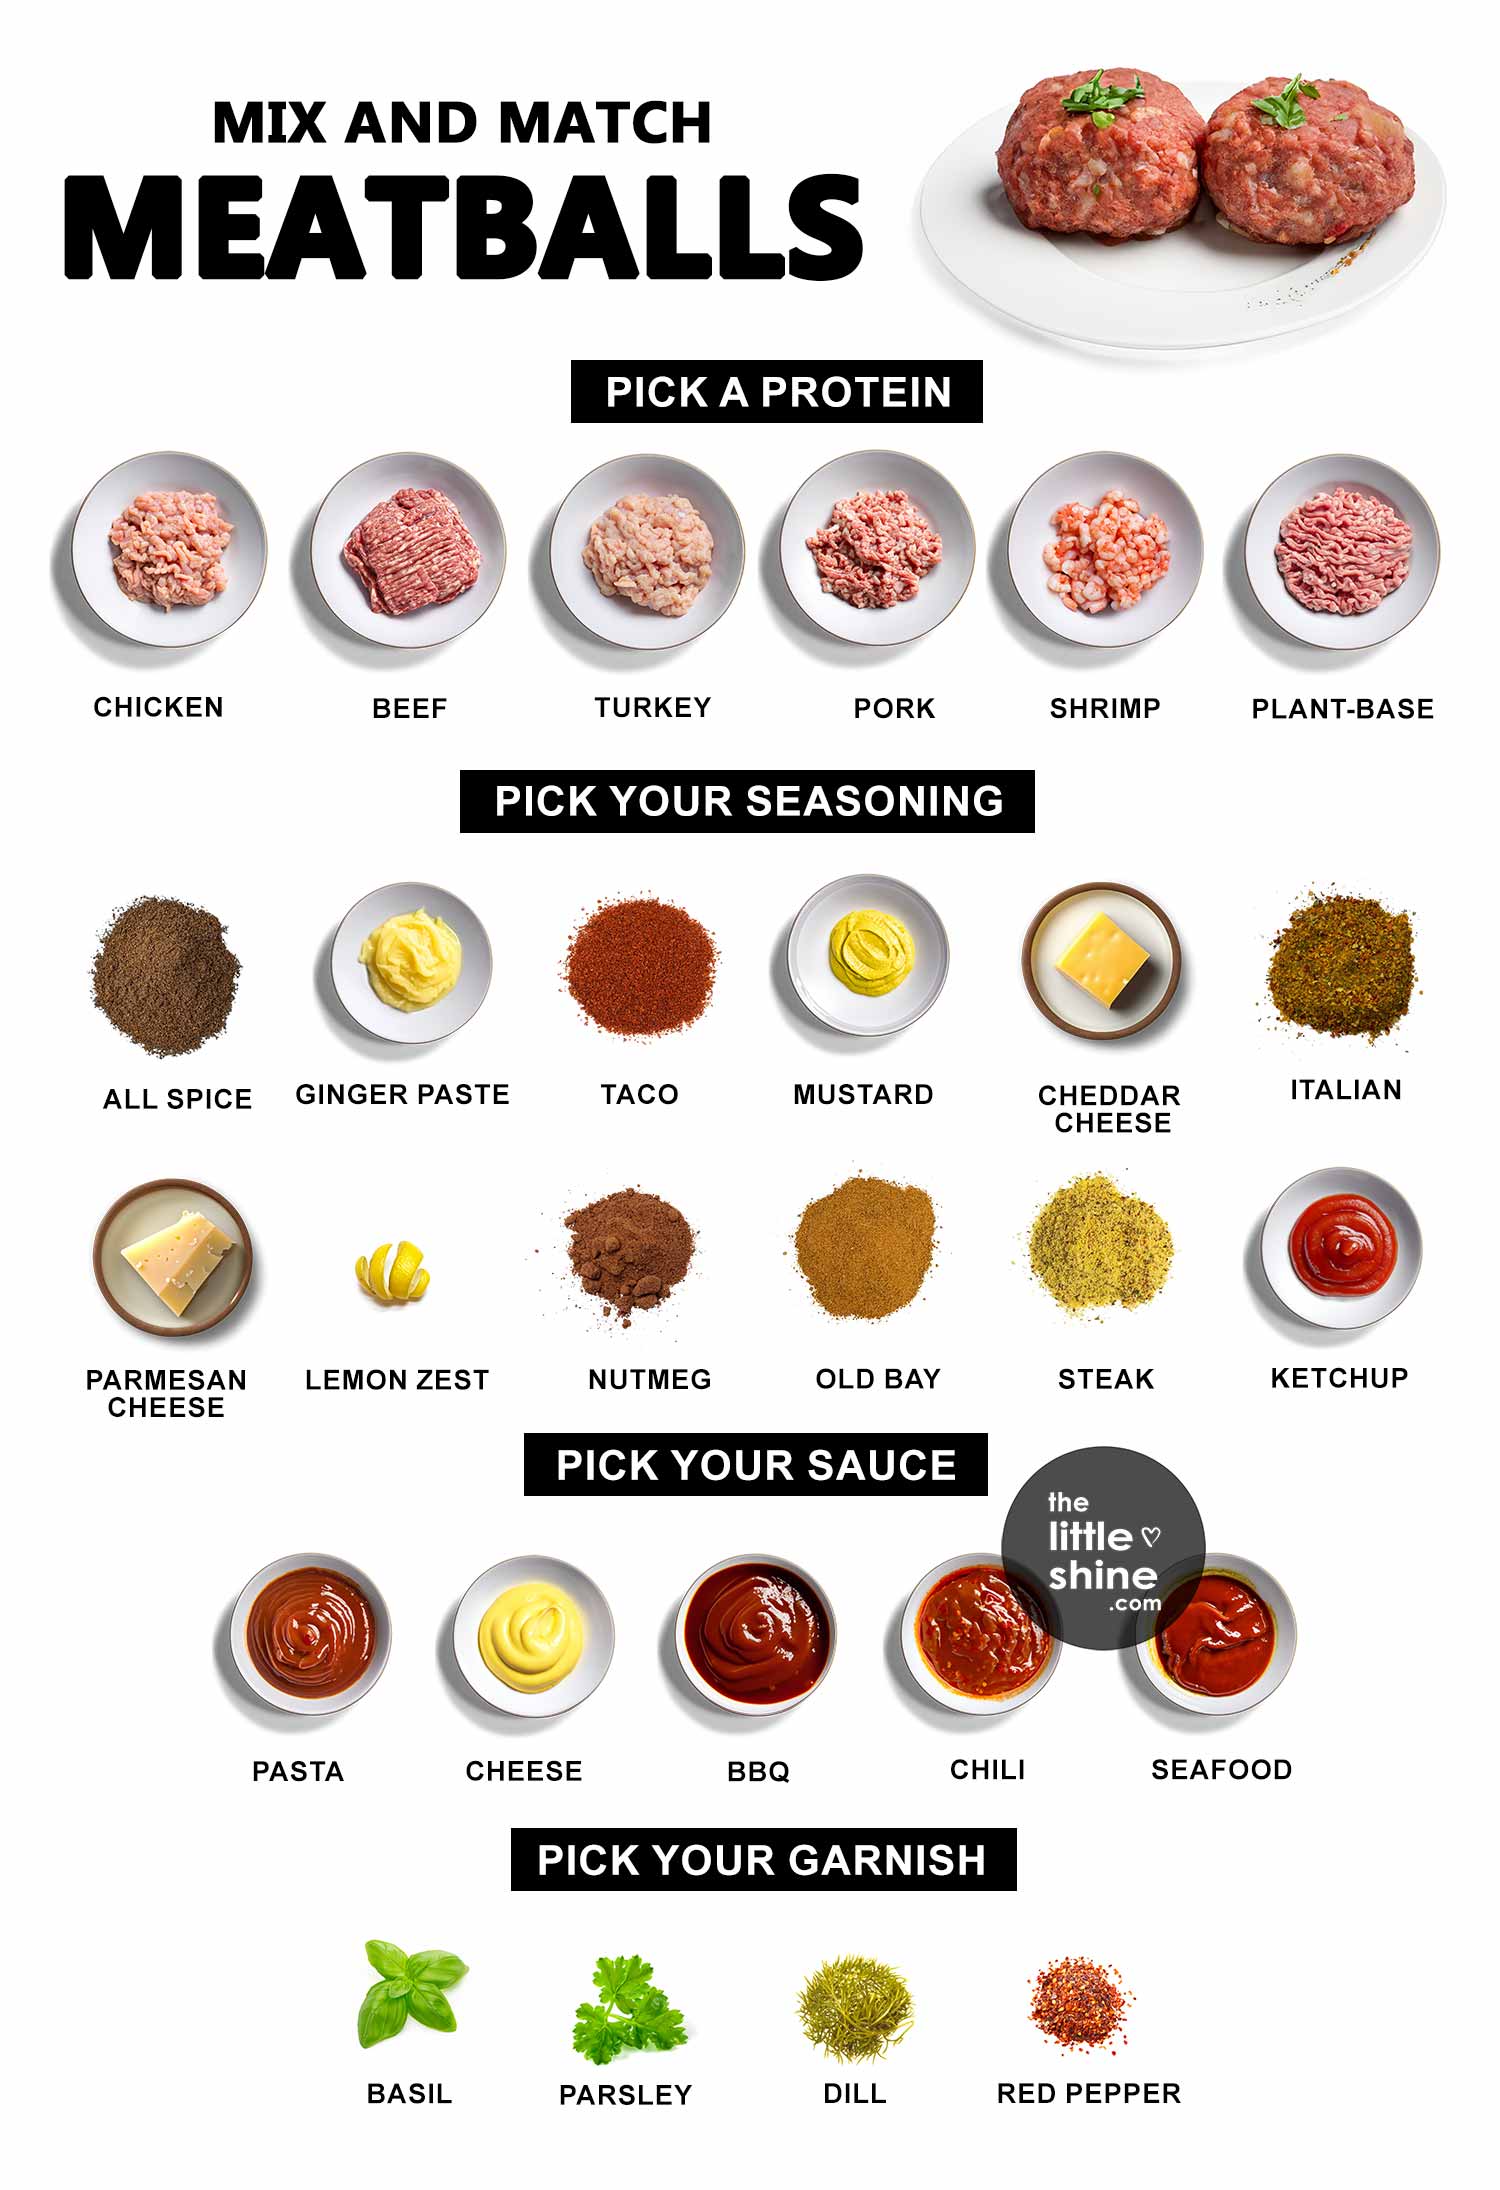 How to Make Meatballs| Build Your Own Mix and Match Meatballs